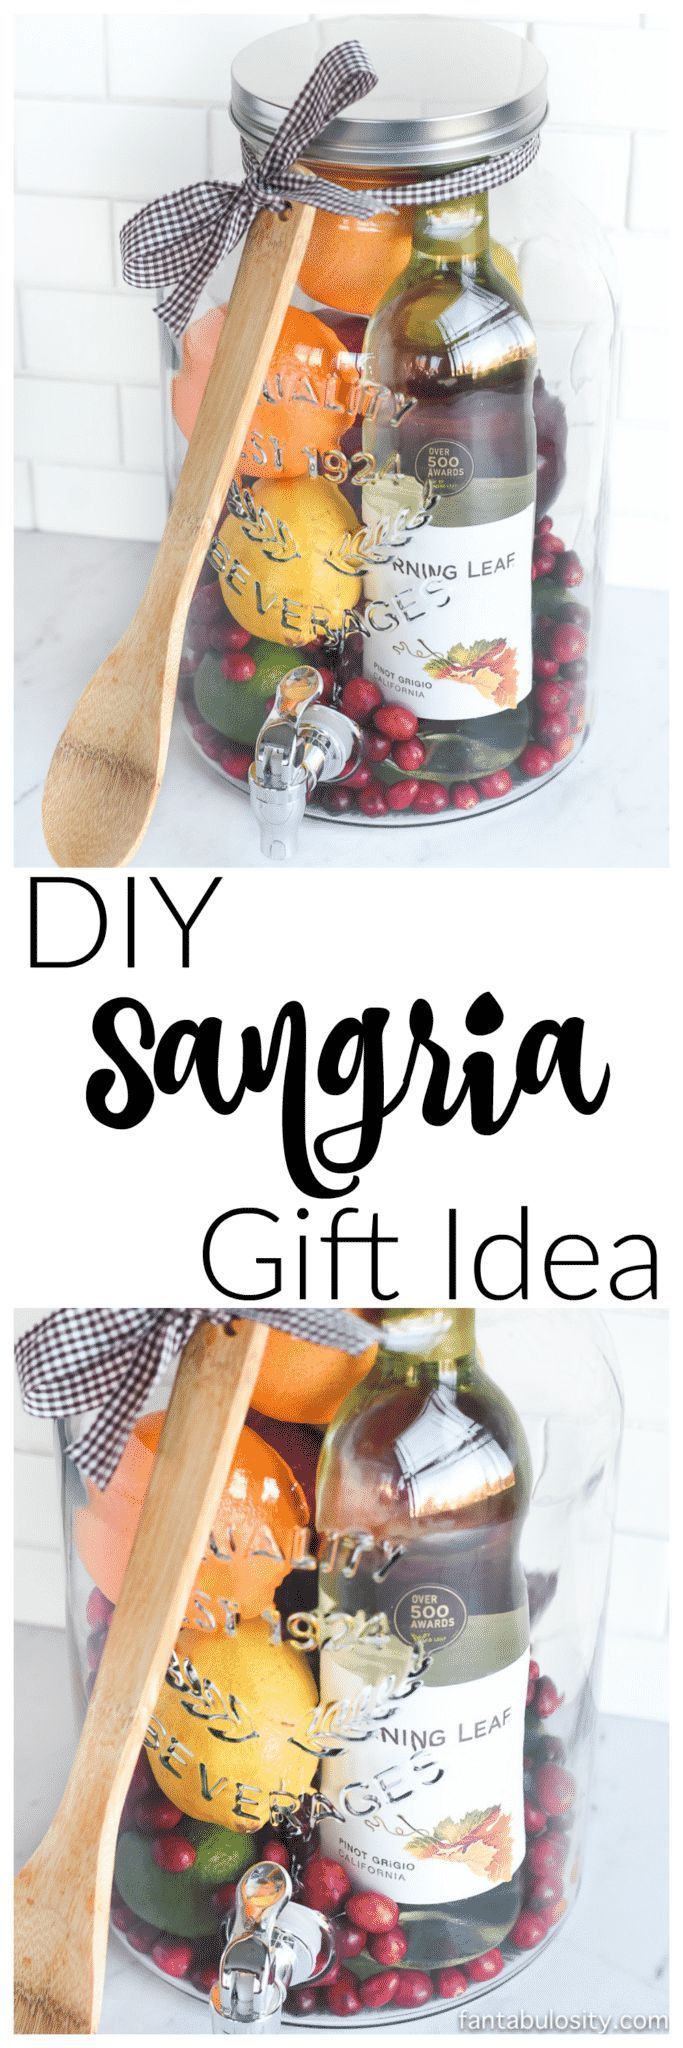 DIY Gift Idea: Sangria Kit - Great for Friends, Housewarming More! -   19 diy Gifts for friends ideas